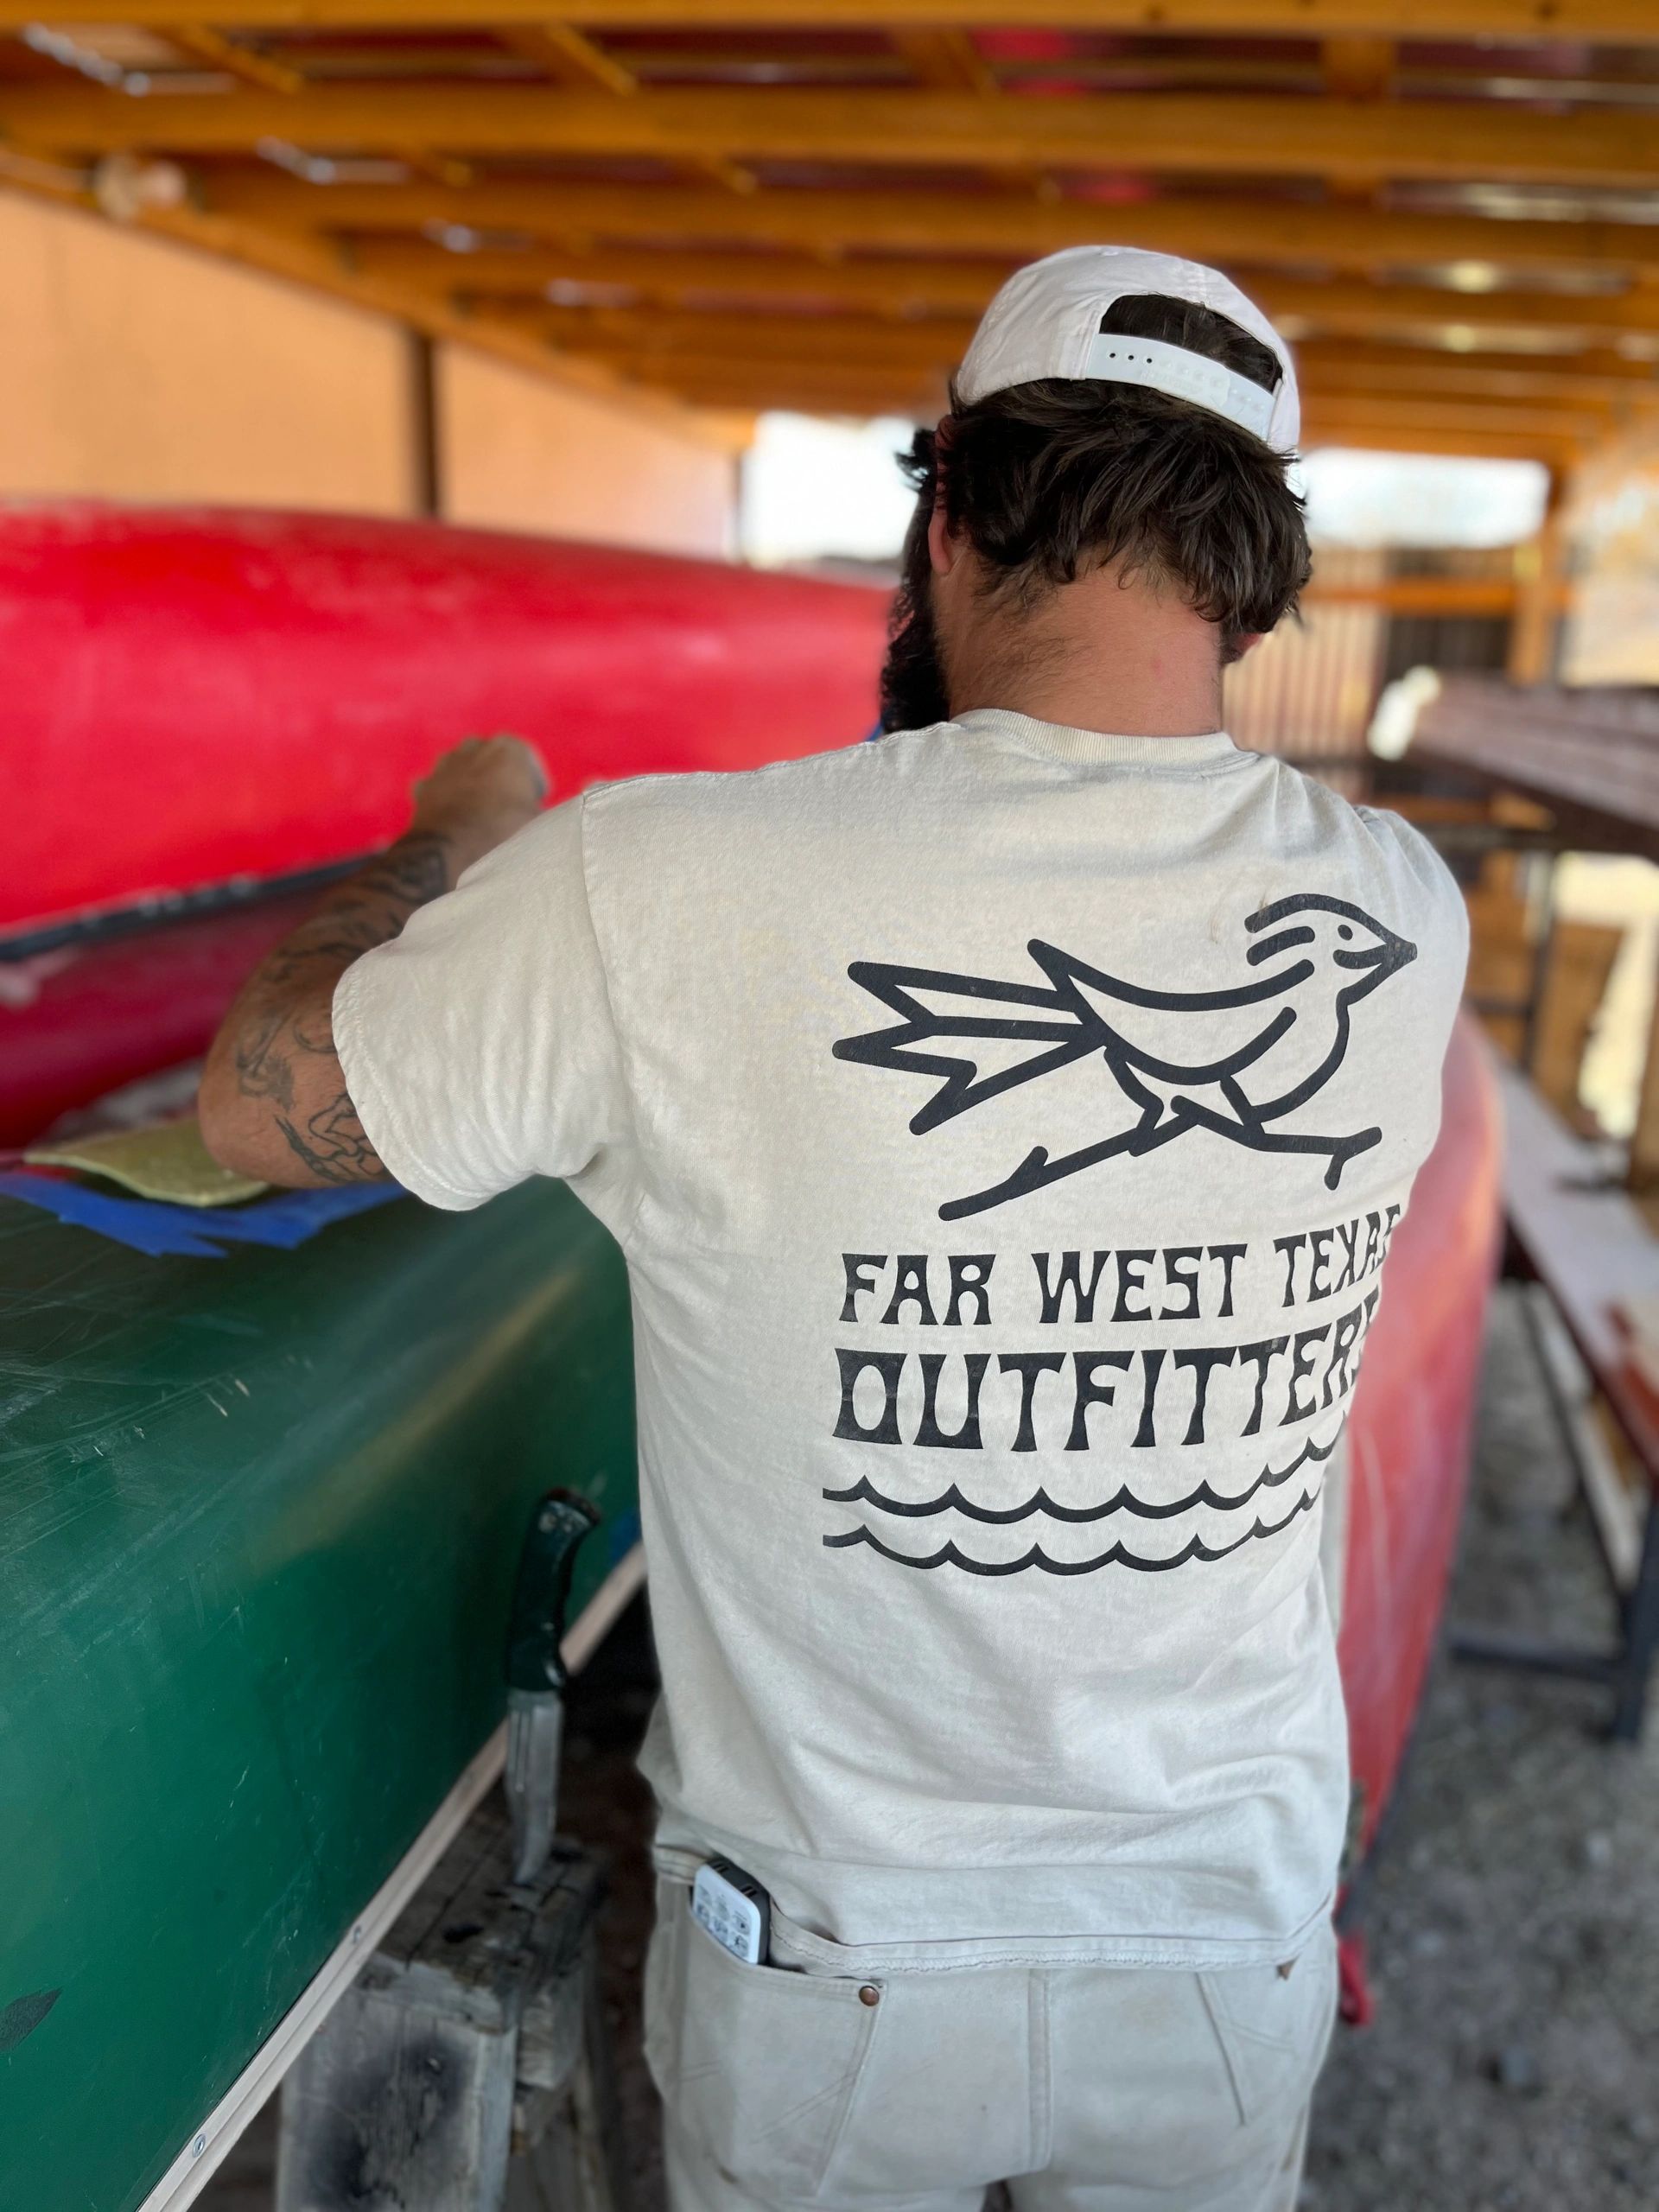 FAR WEST TEXAS OUTFITTERS SHIRT